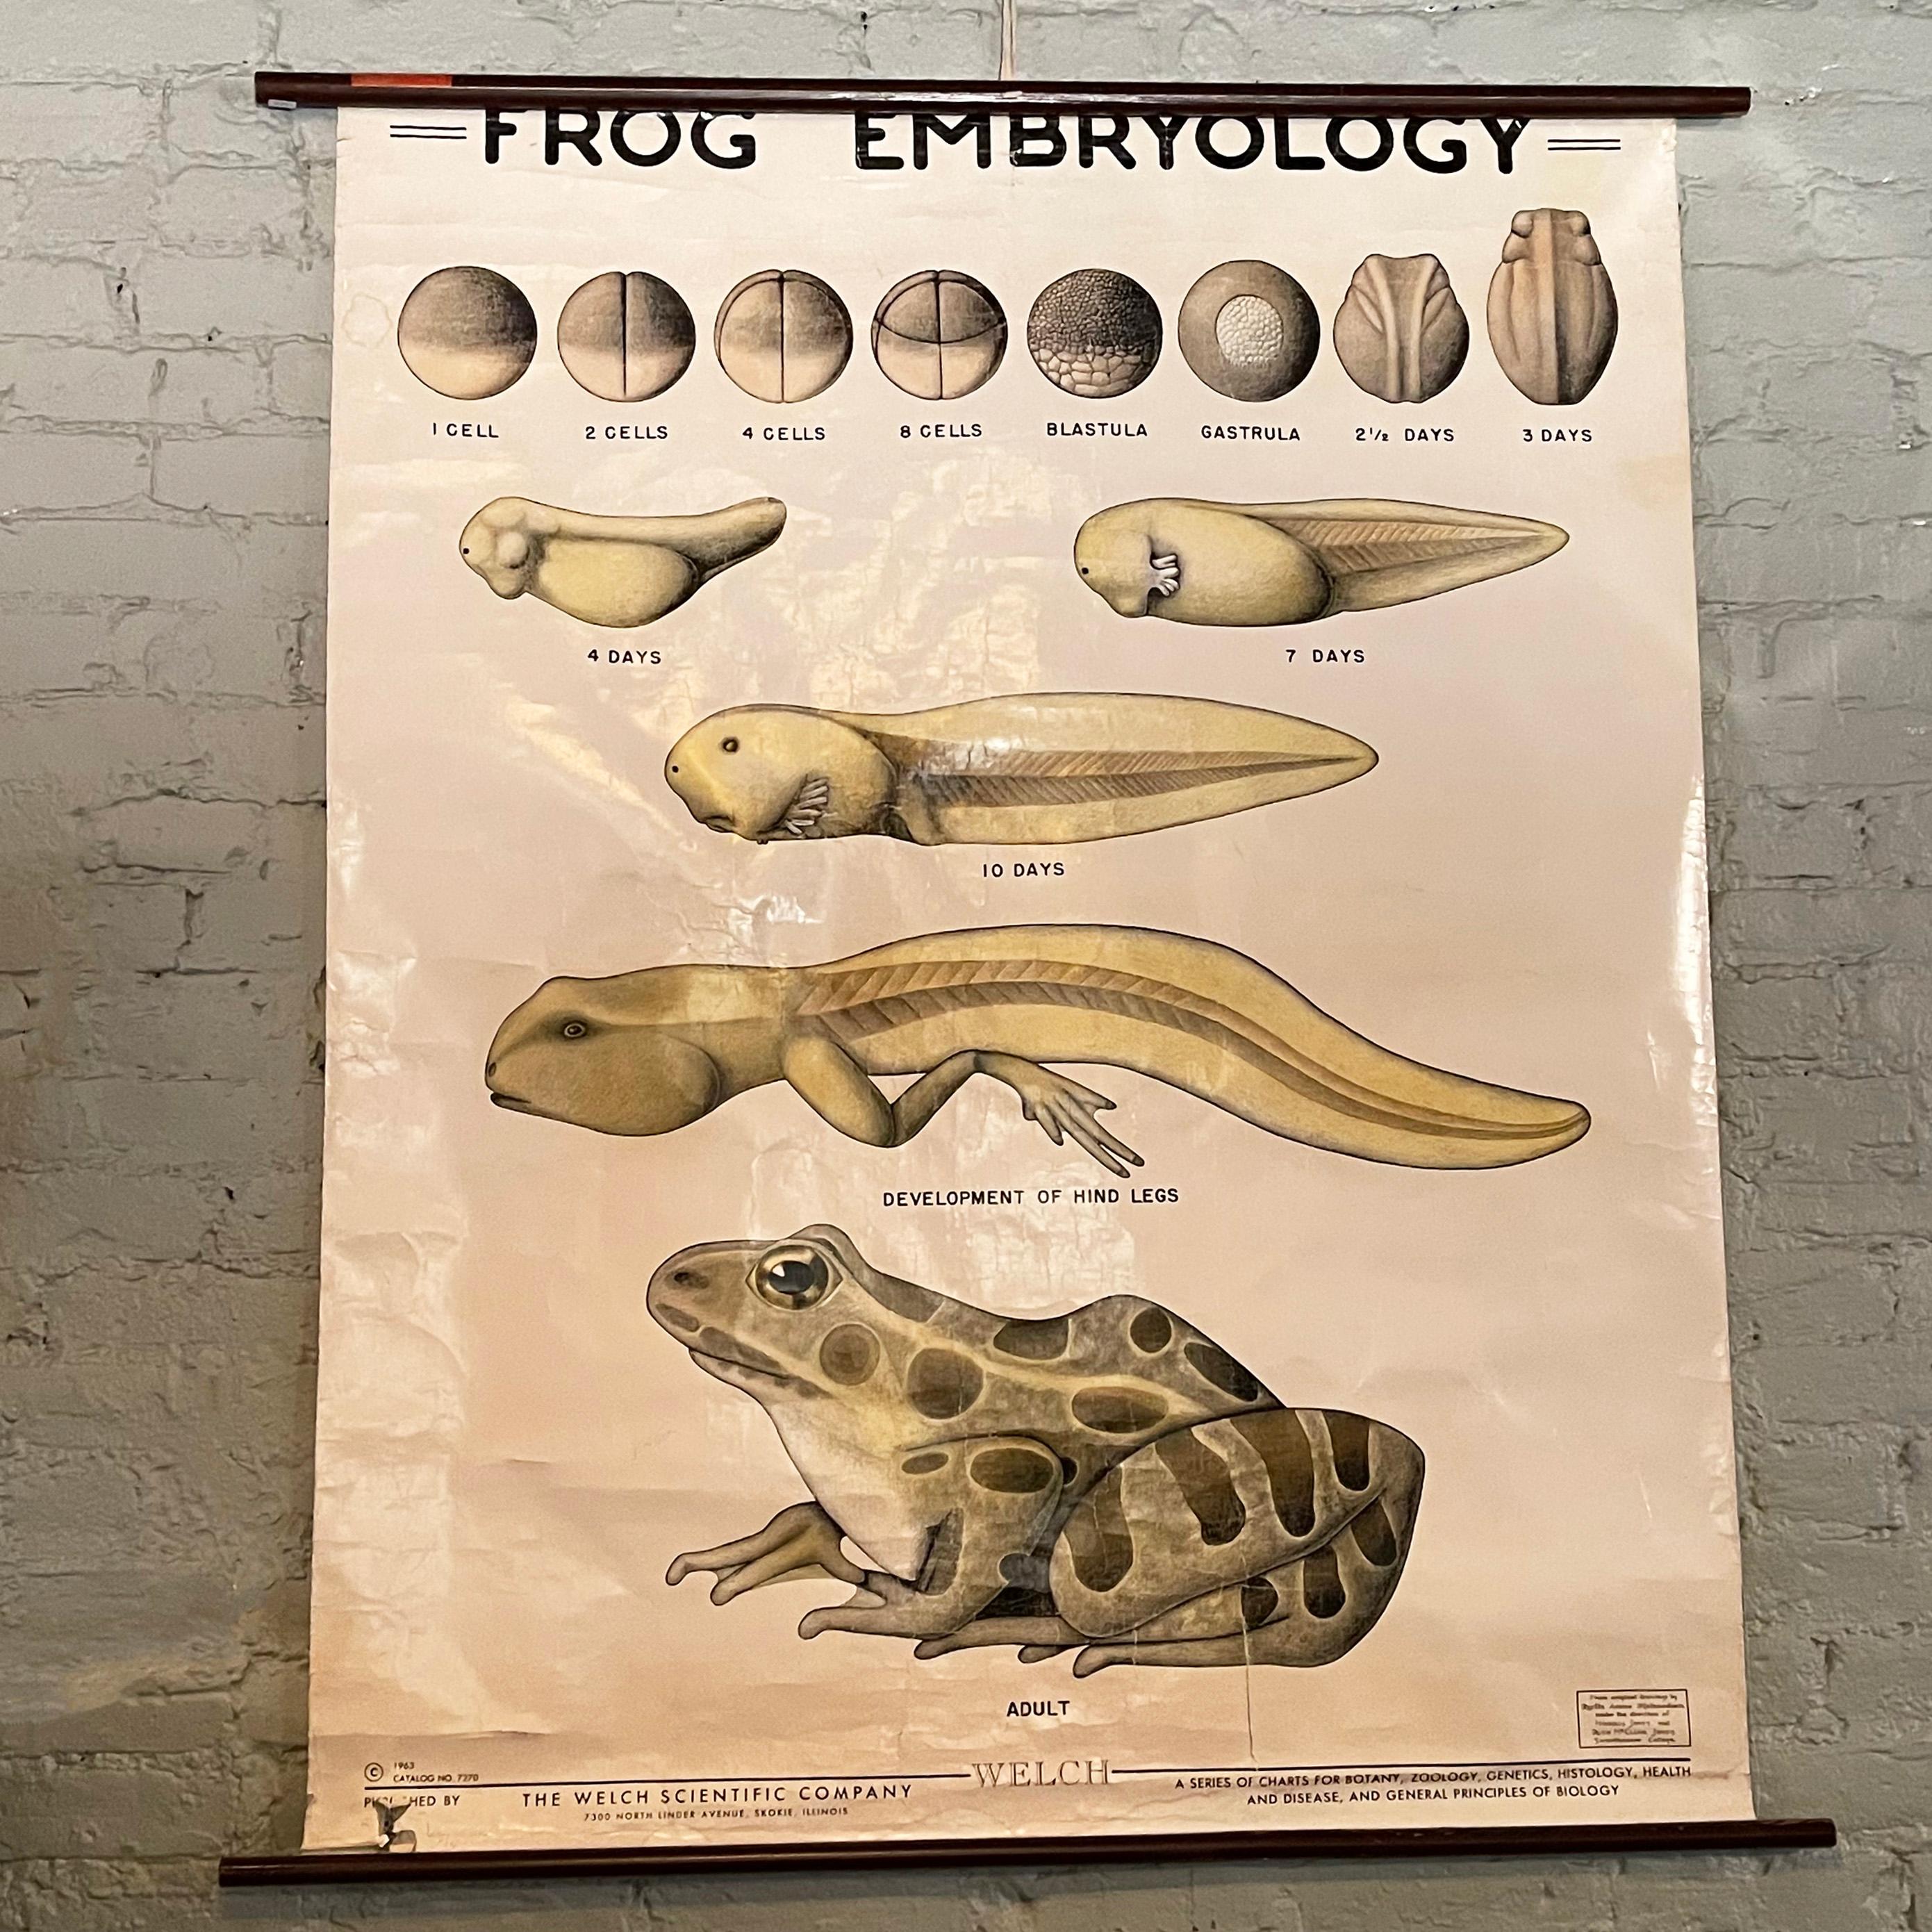 Educational, zoological, roll-up chart depicting frog embryology by The Welch Scientific Company is printed on fortified paper with canvas backing on stained maple rod with ring and cotton tie for hanging.